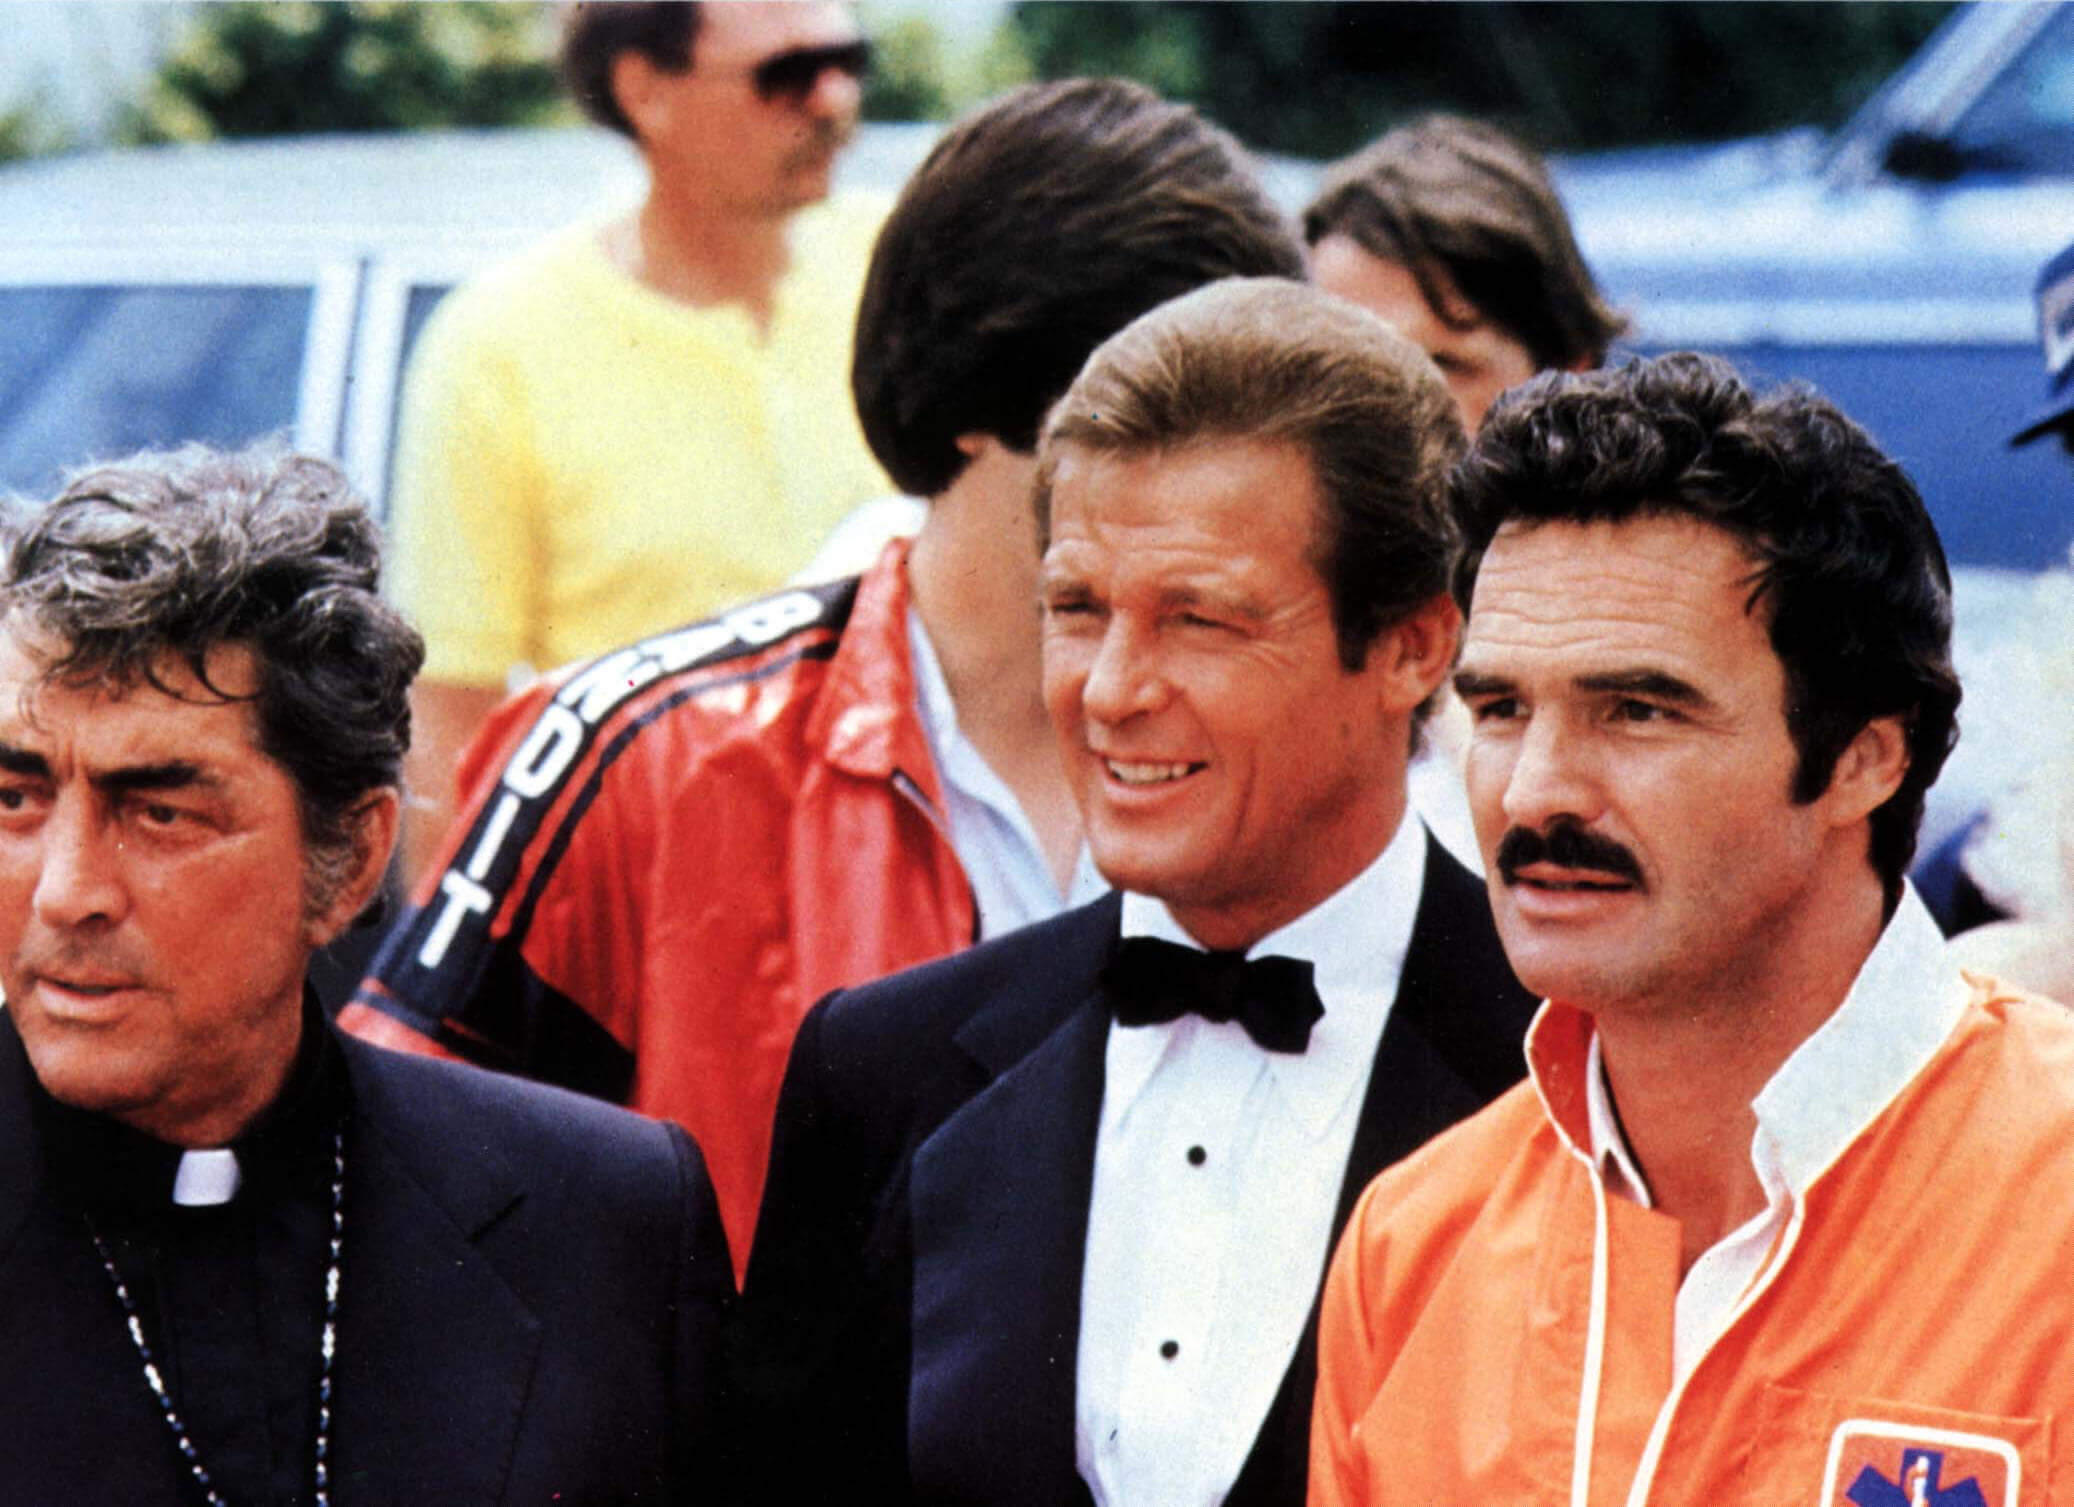 Roger with Dean Martin (left) and Burt Reynolds (right) in Canonball Run (1981). RGR Collection / Alamy Stock Photo.